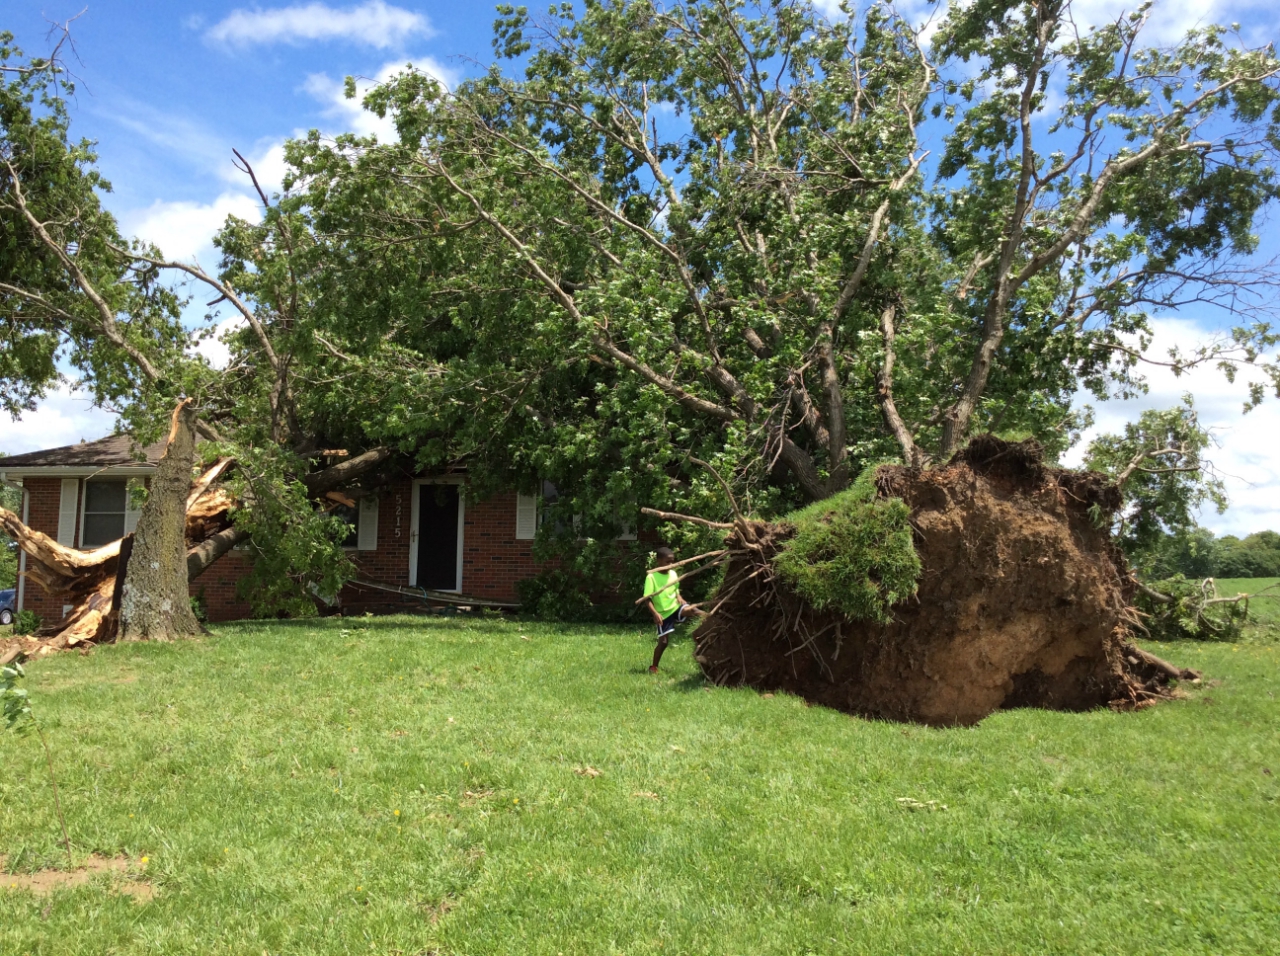 Photo of large tree uprooted and fell onto house on Wardsville Road.